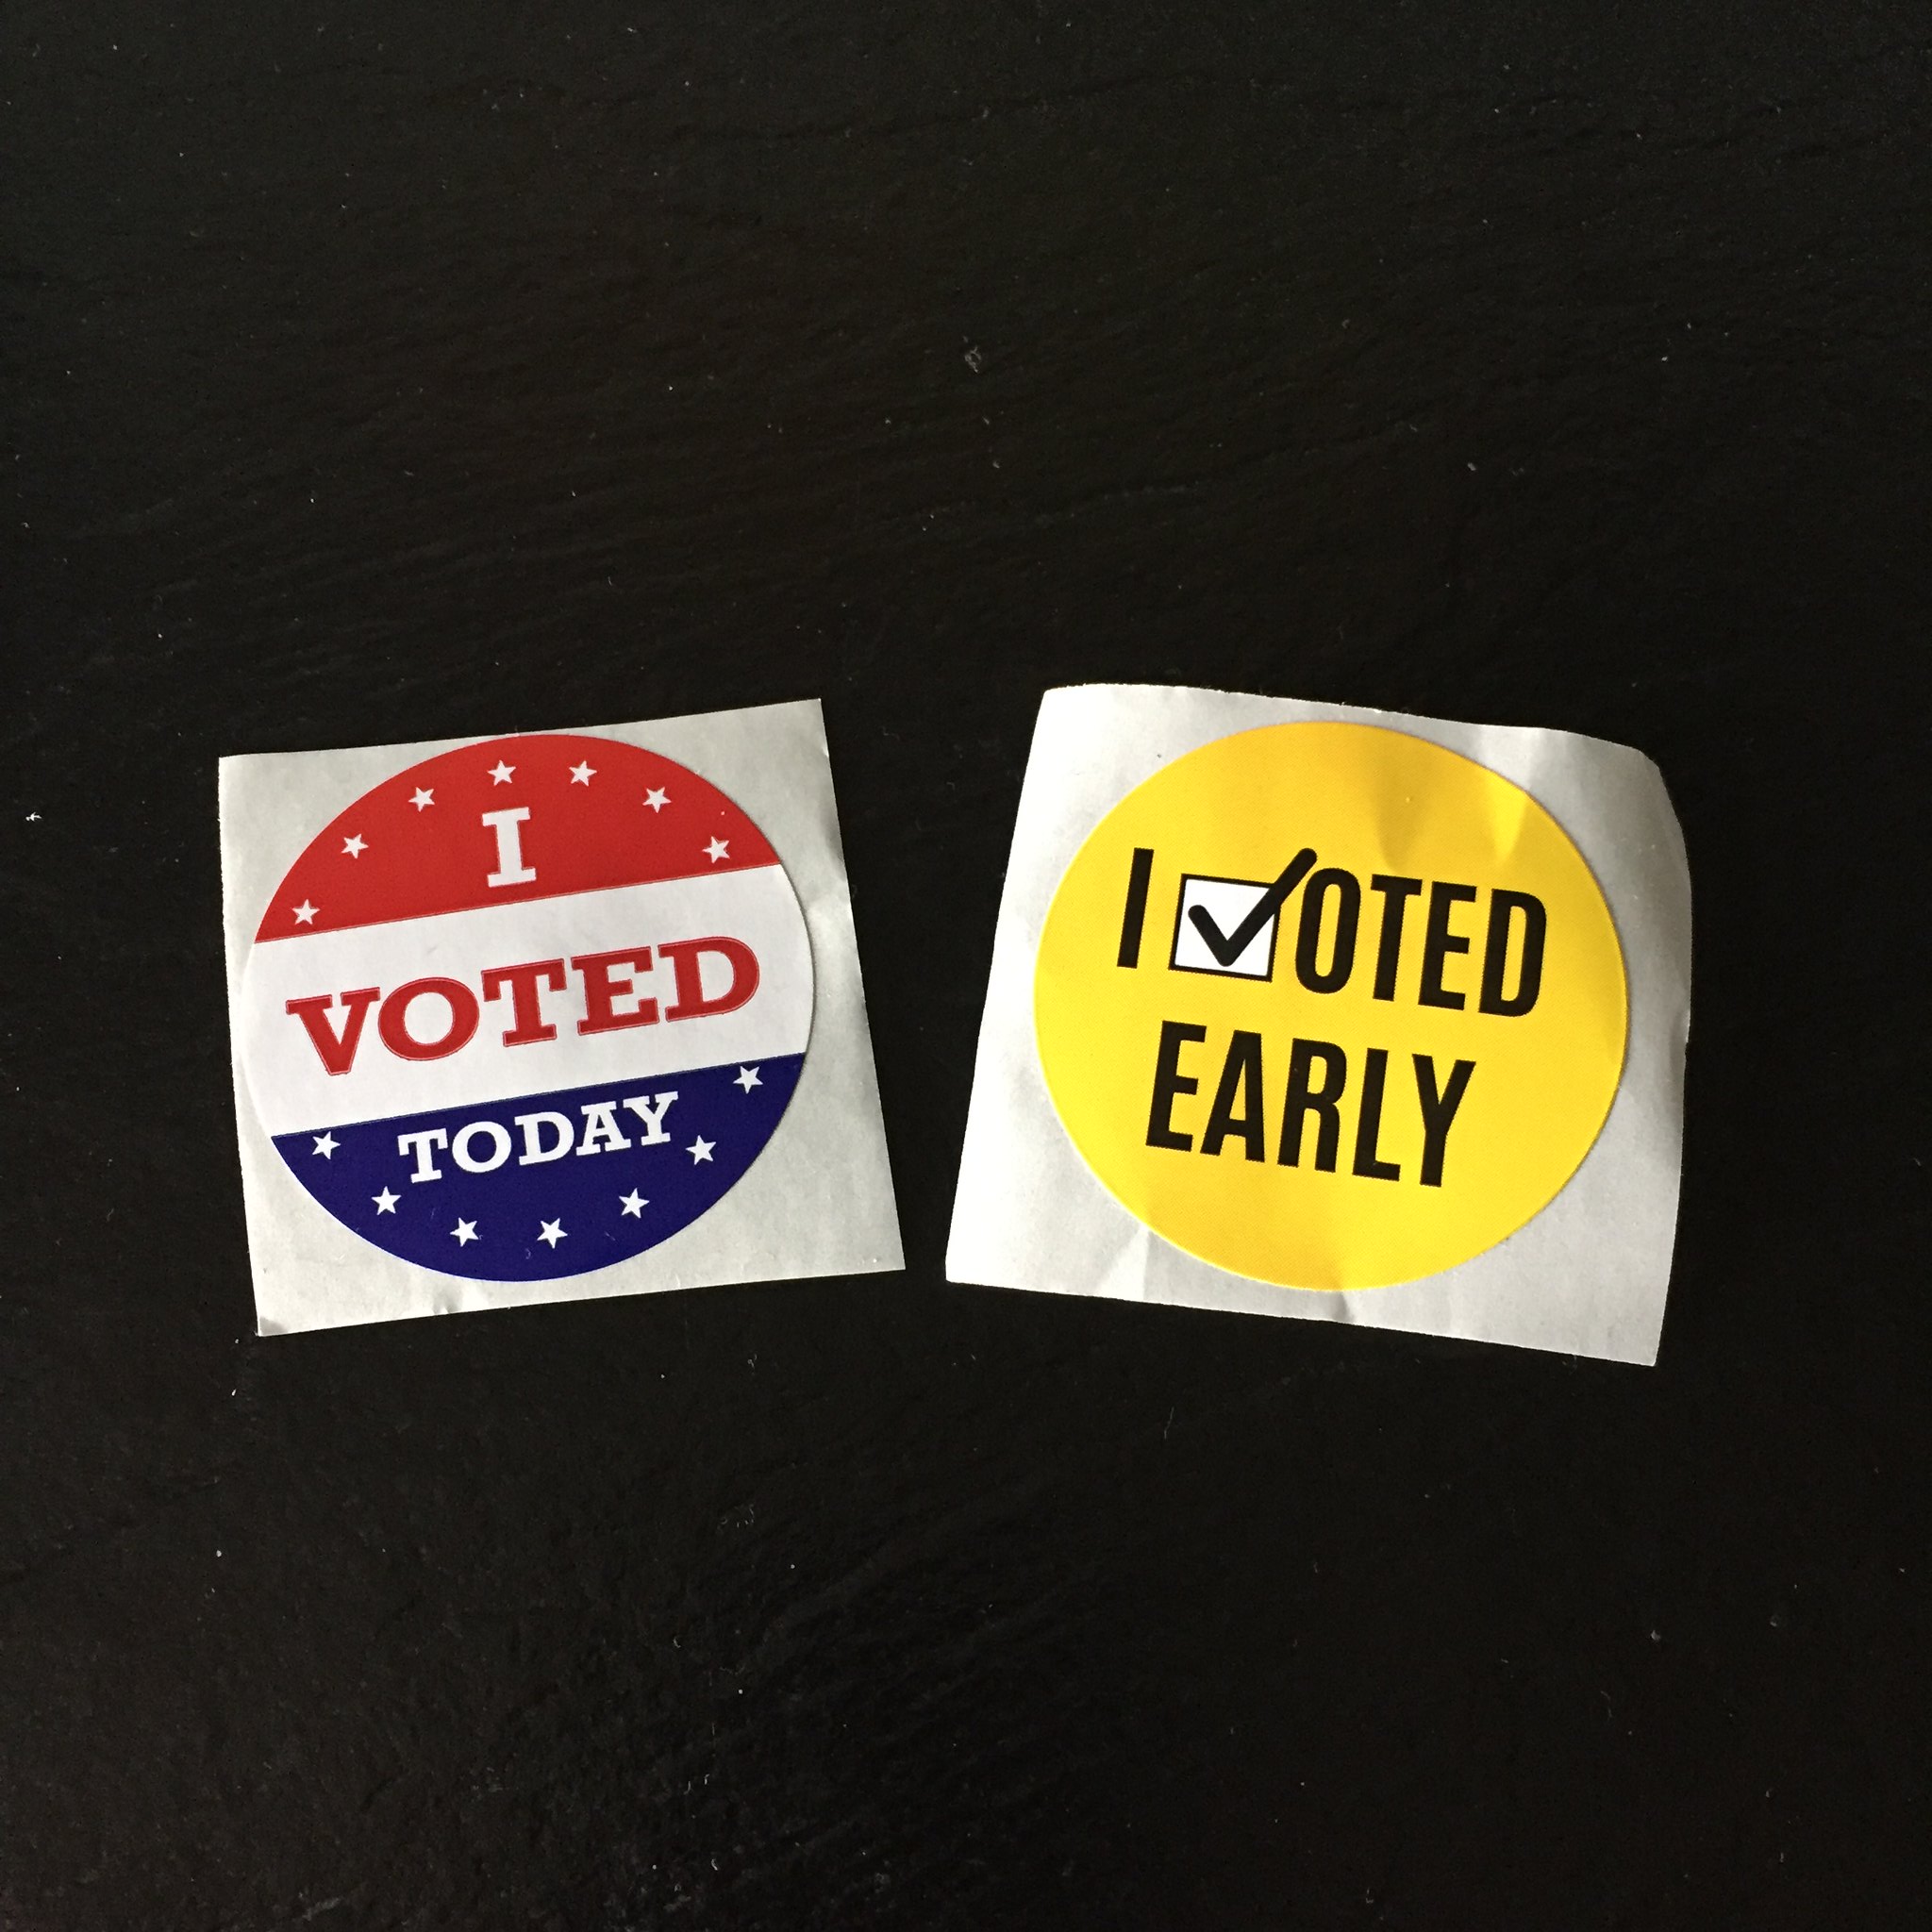 'I voted' stickers 2020